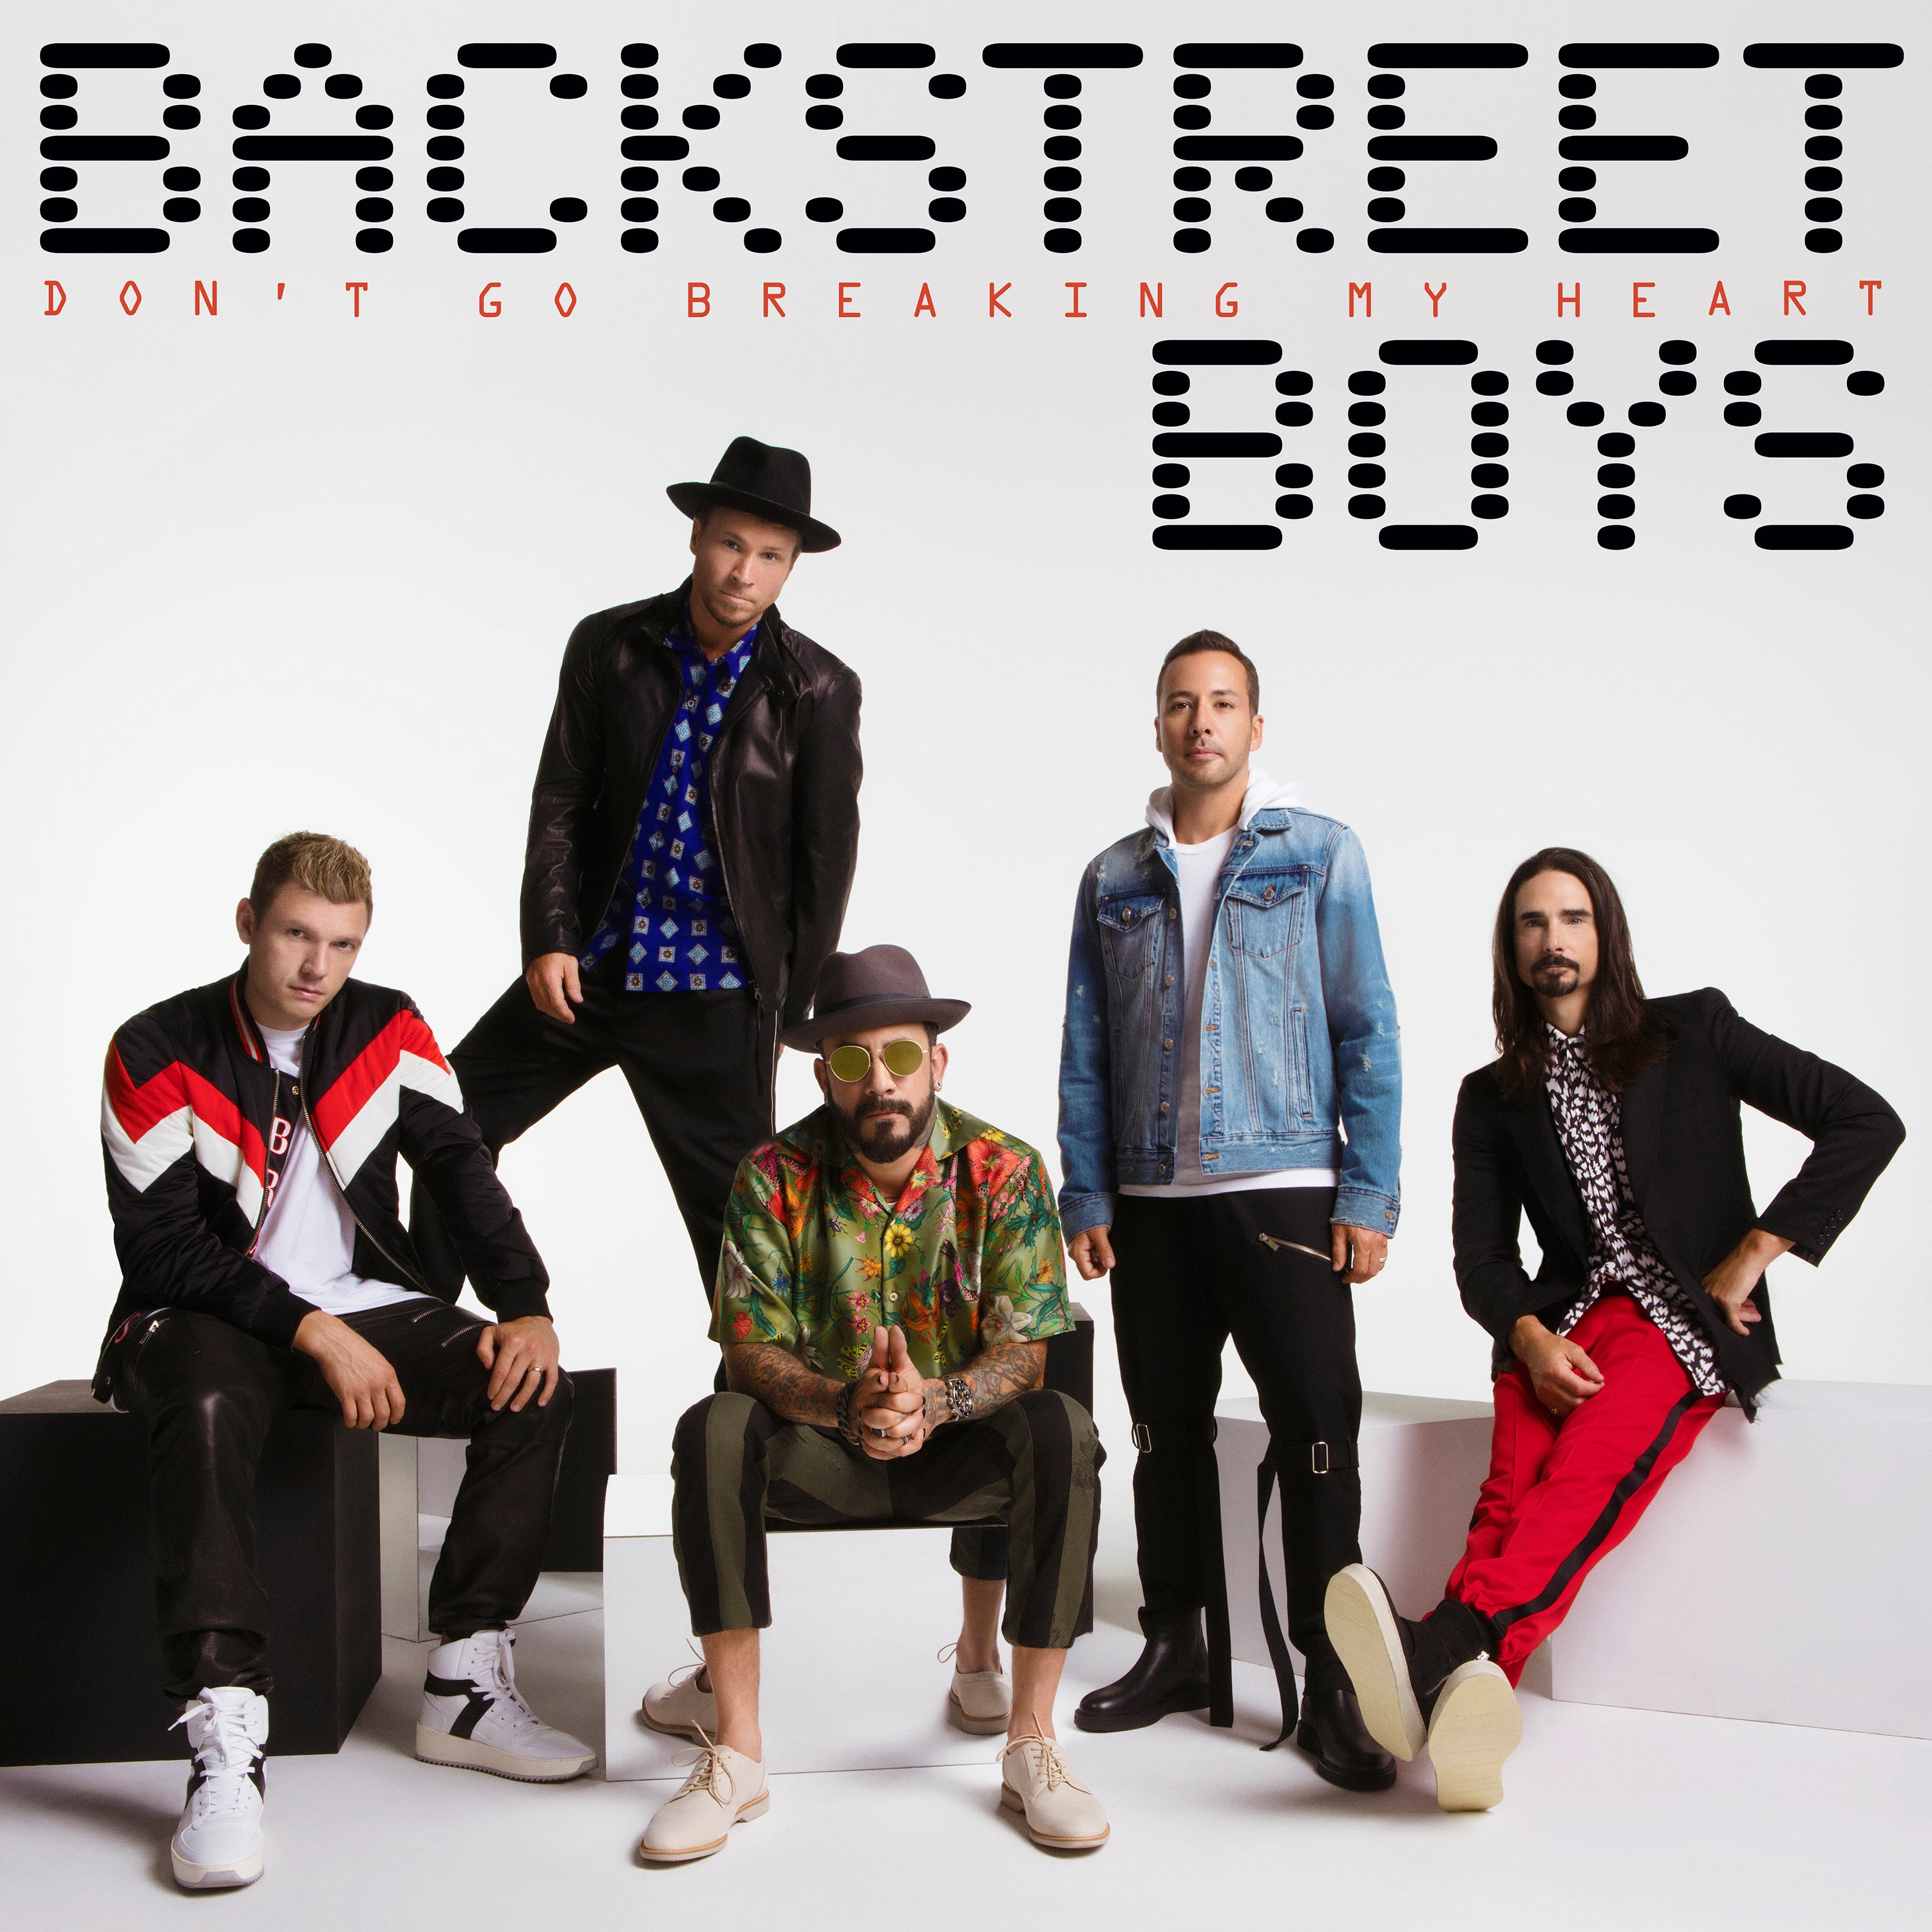 Quit Playing Games (With My Heart) Song by Backstreet Boys